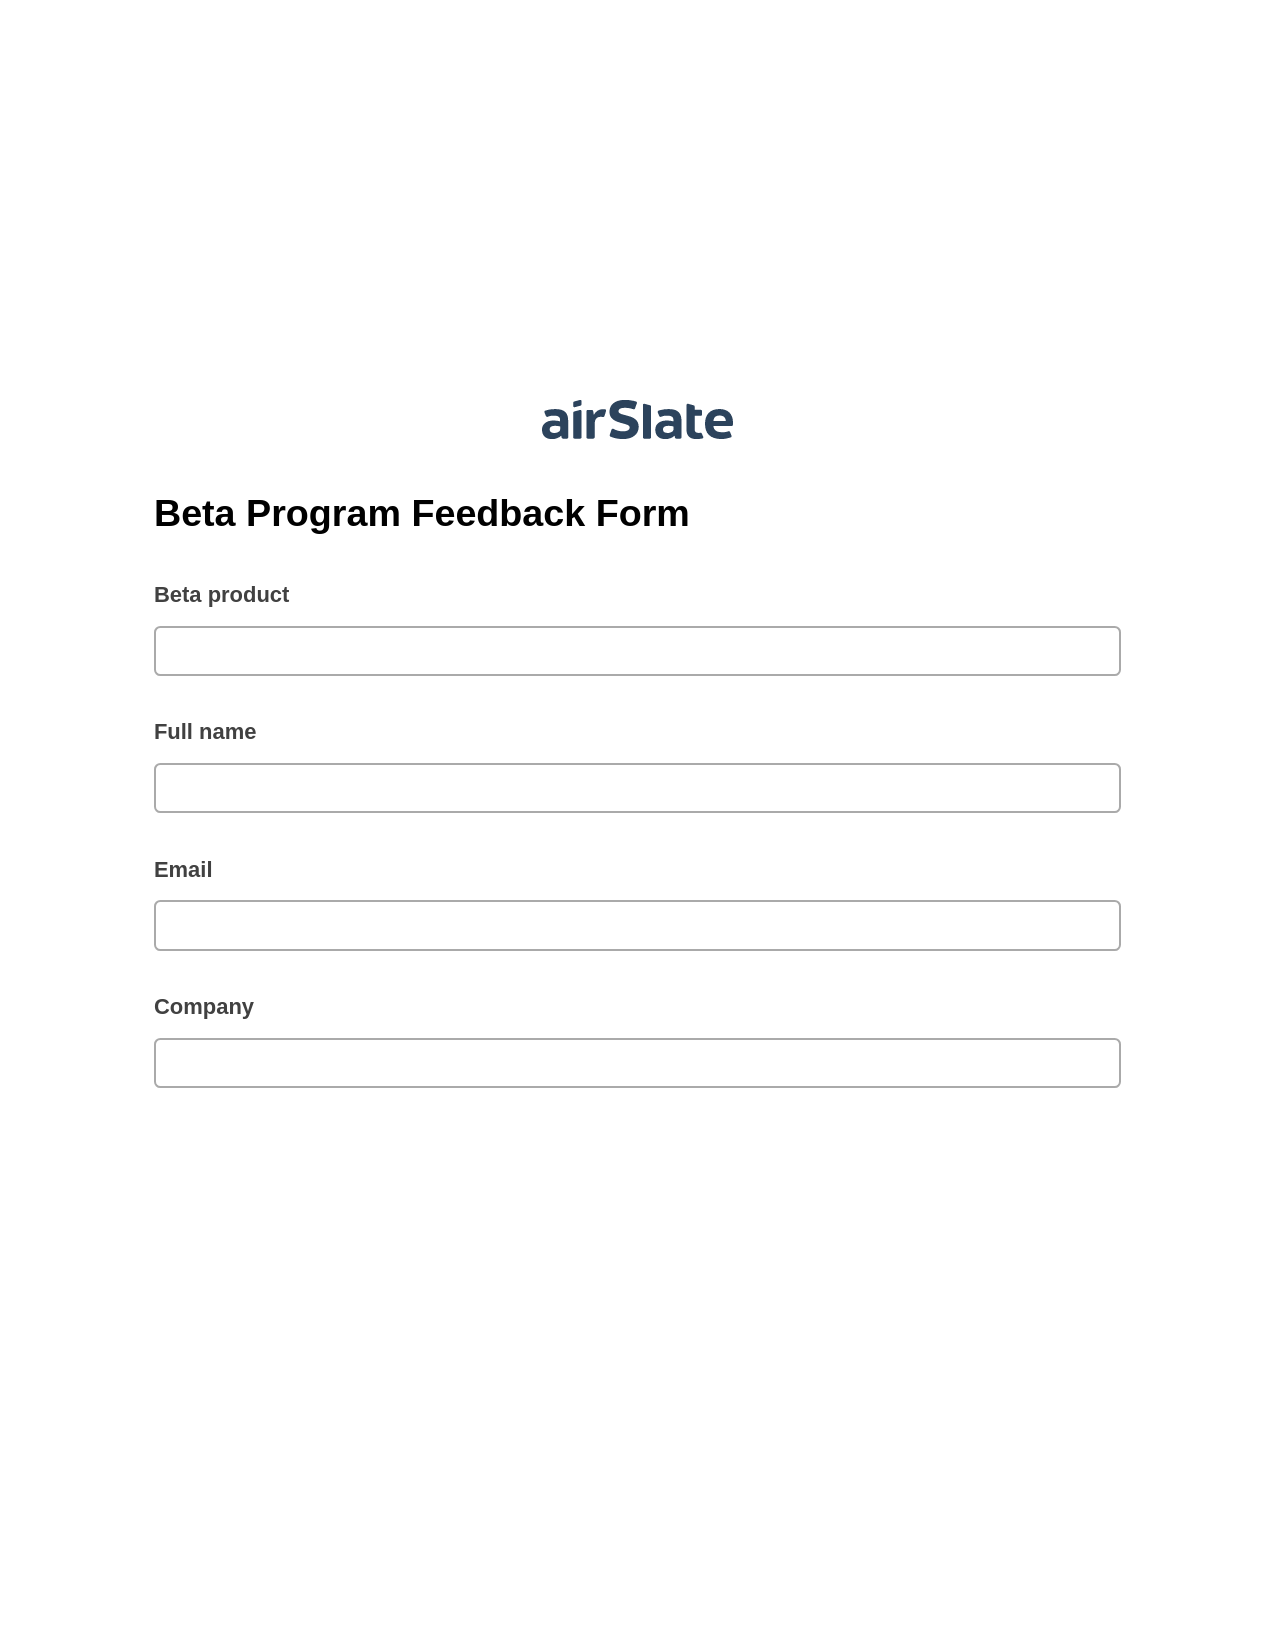 Multirole Beta Program Feedback Form Pre-fill from Google Sheets Bot, Export to MS Dynamics 365 Bot, Post-finish Document Bot